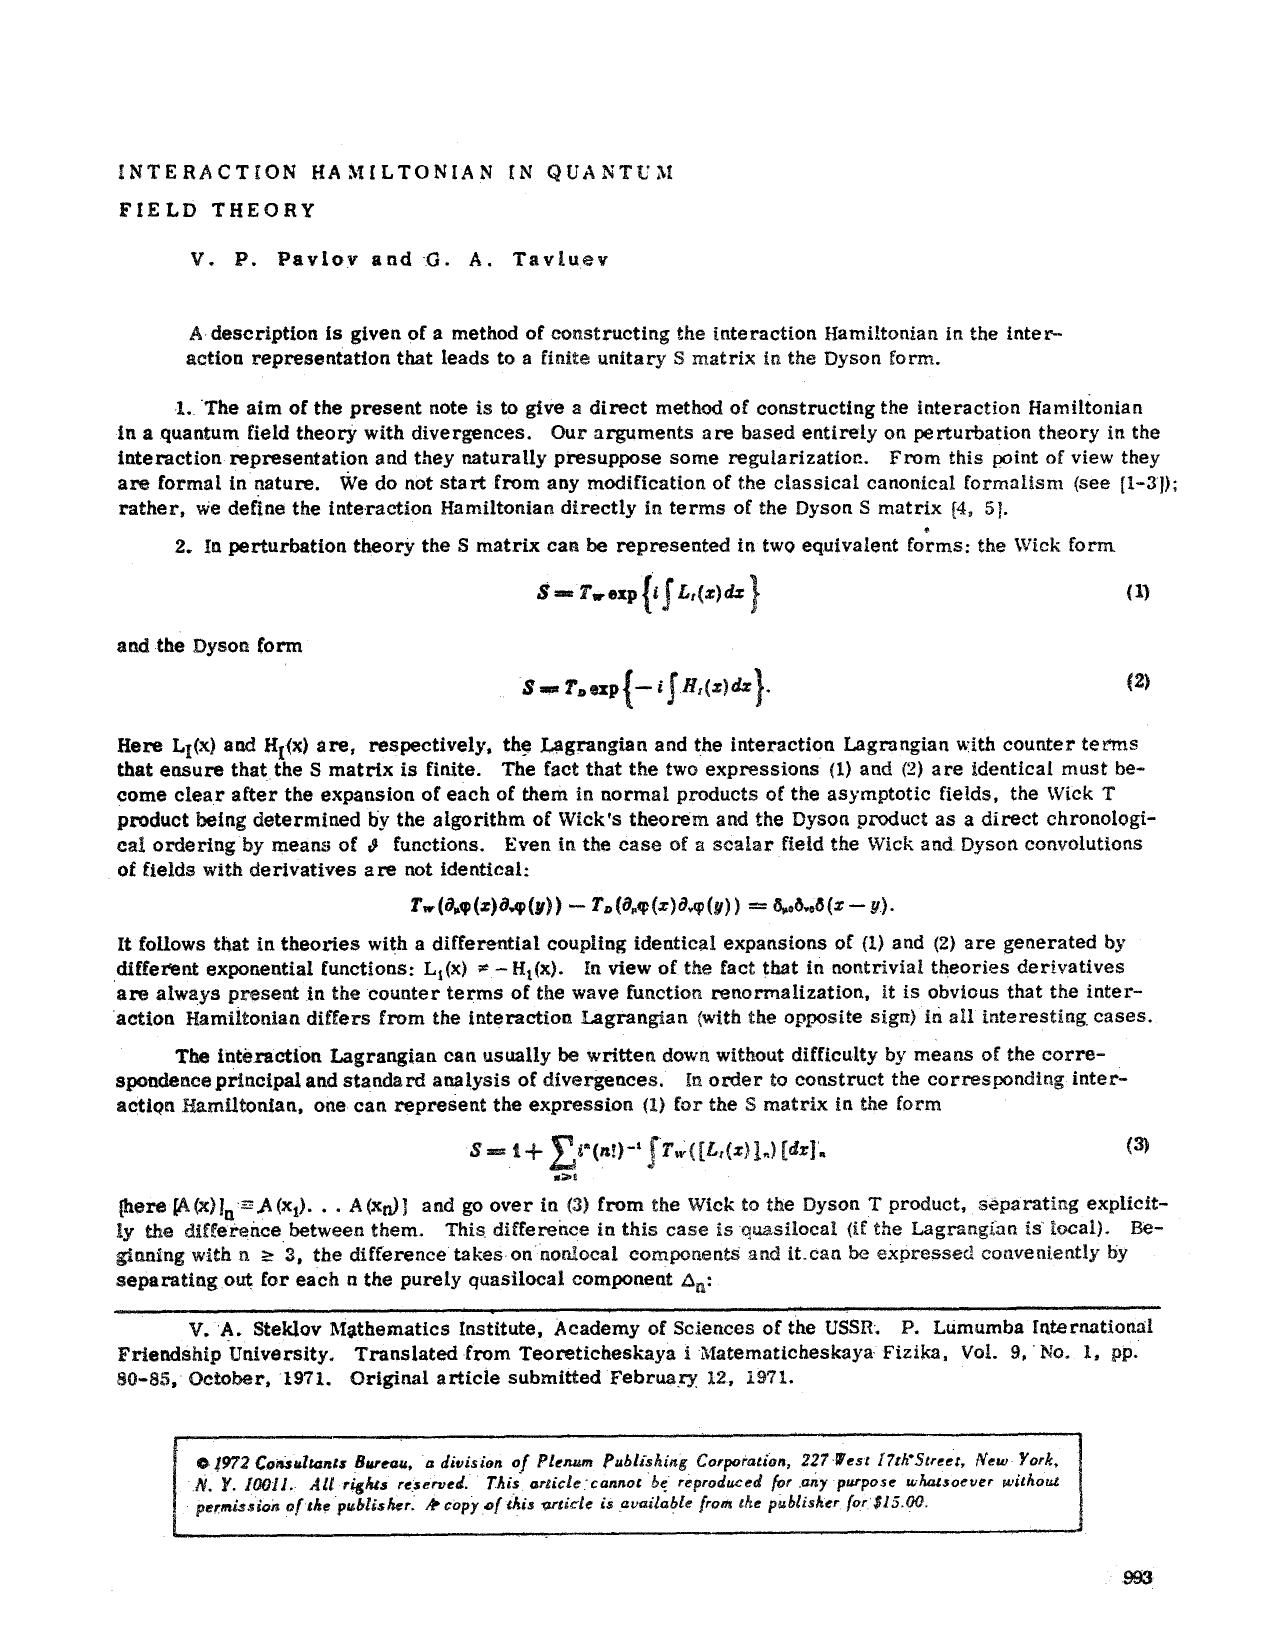 Interaction Hamiltonian in quantum field theory by Unknown